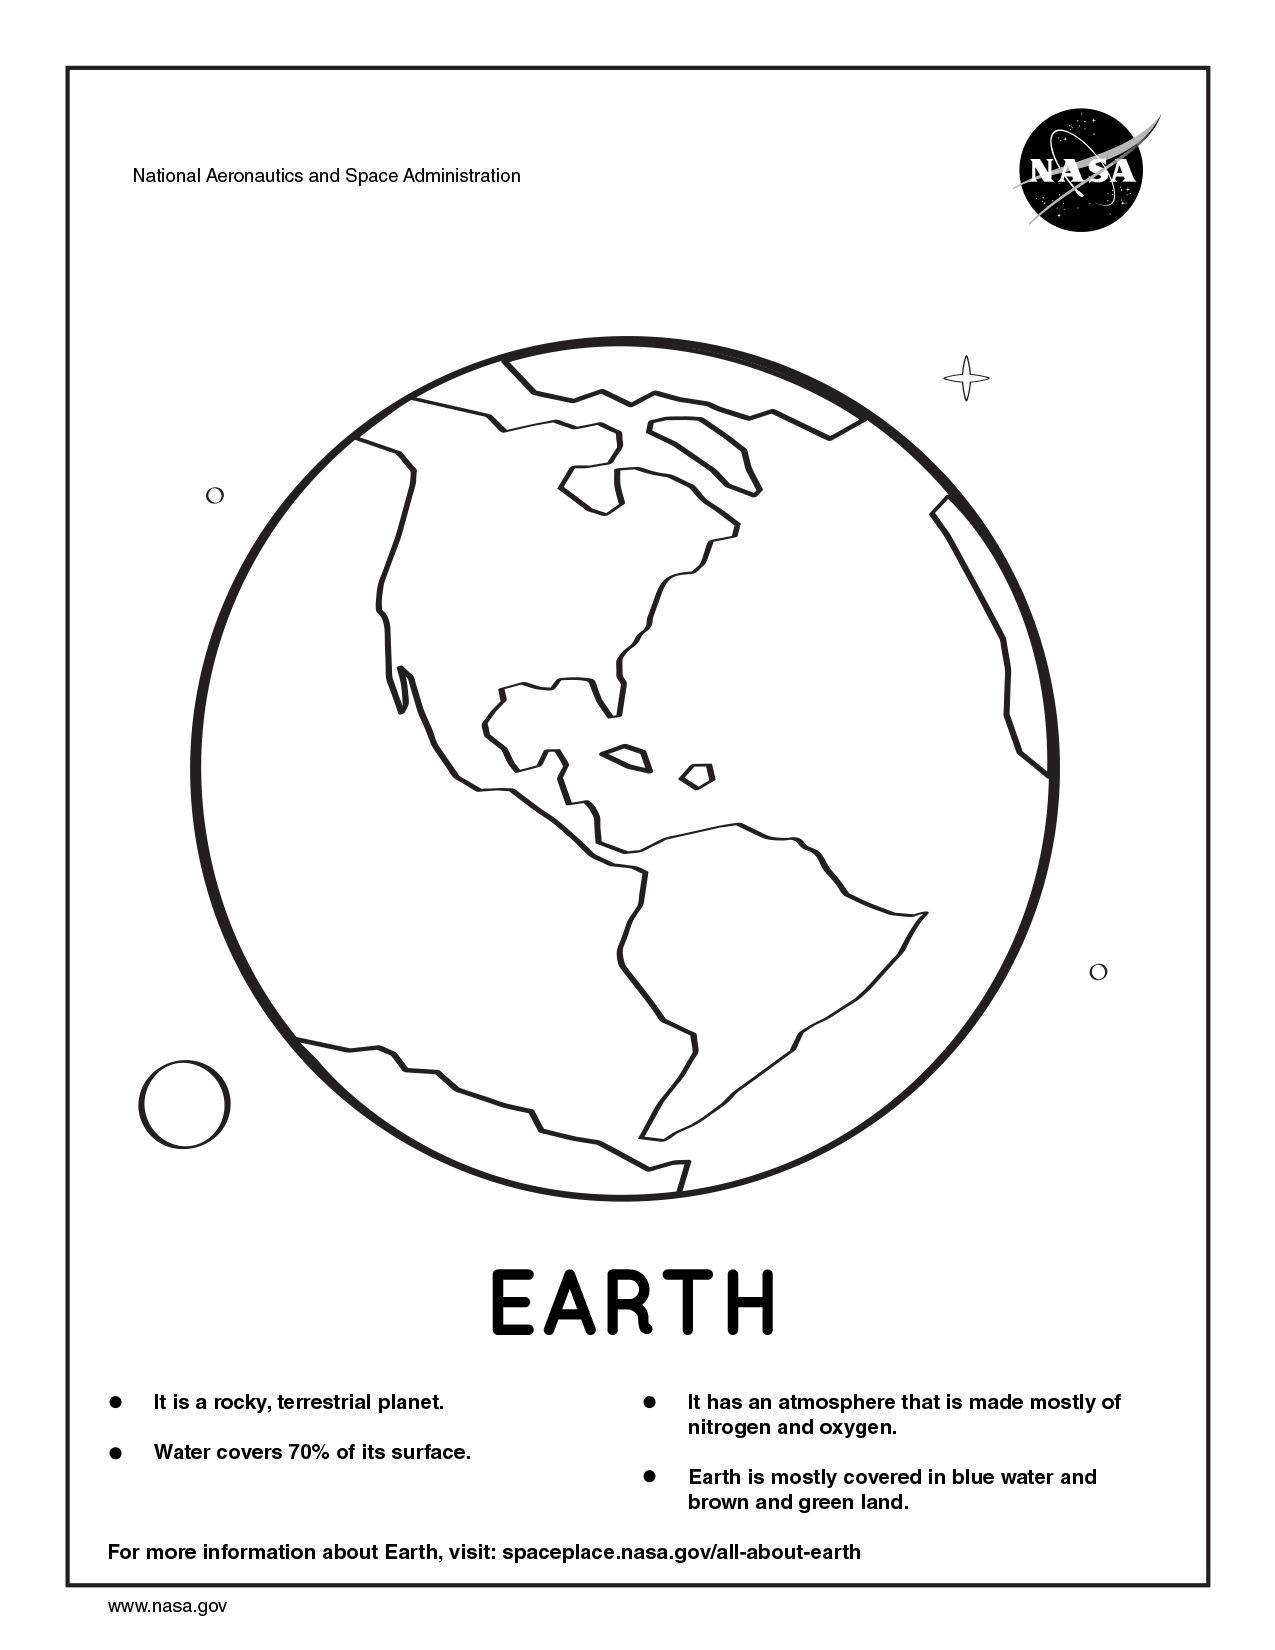 Instant Download Printable Space Activities for Kids Space Colouring Book Kids Space Activity Book